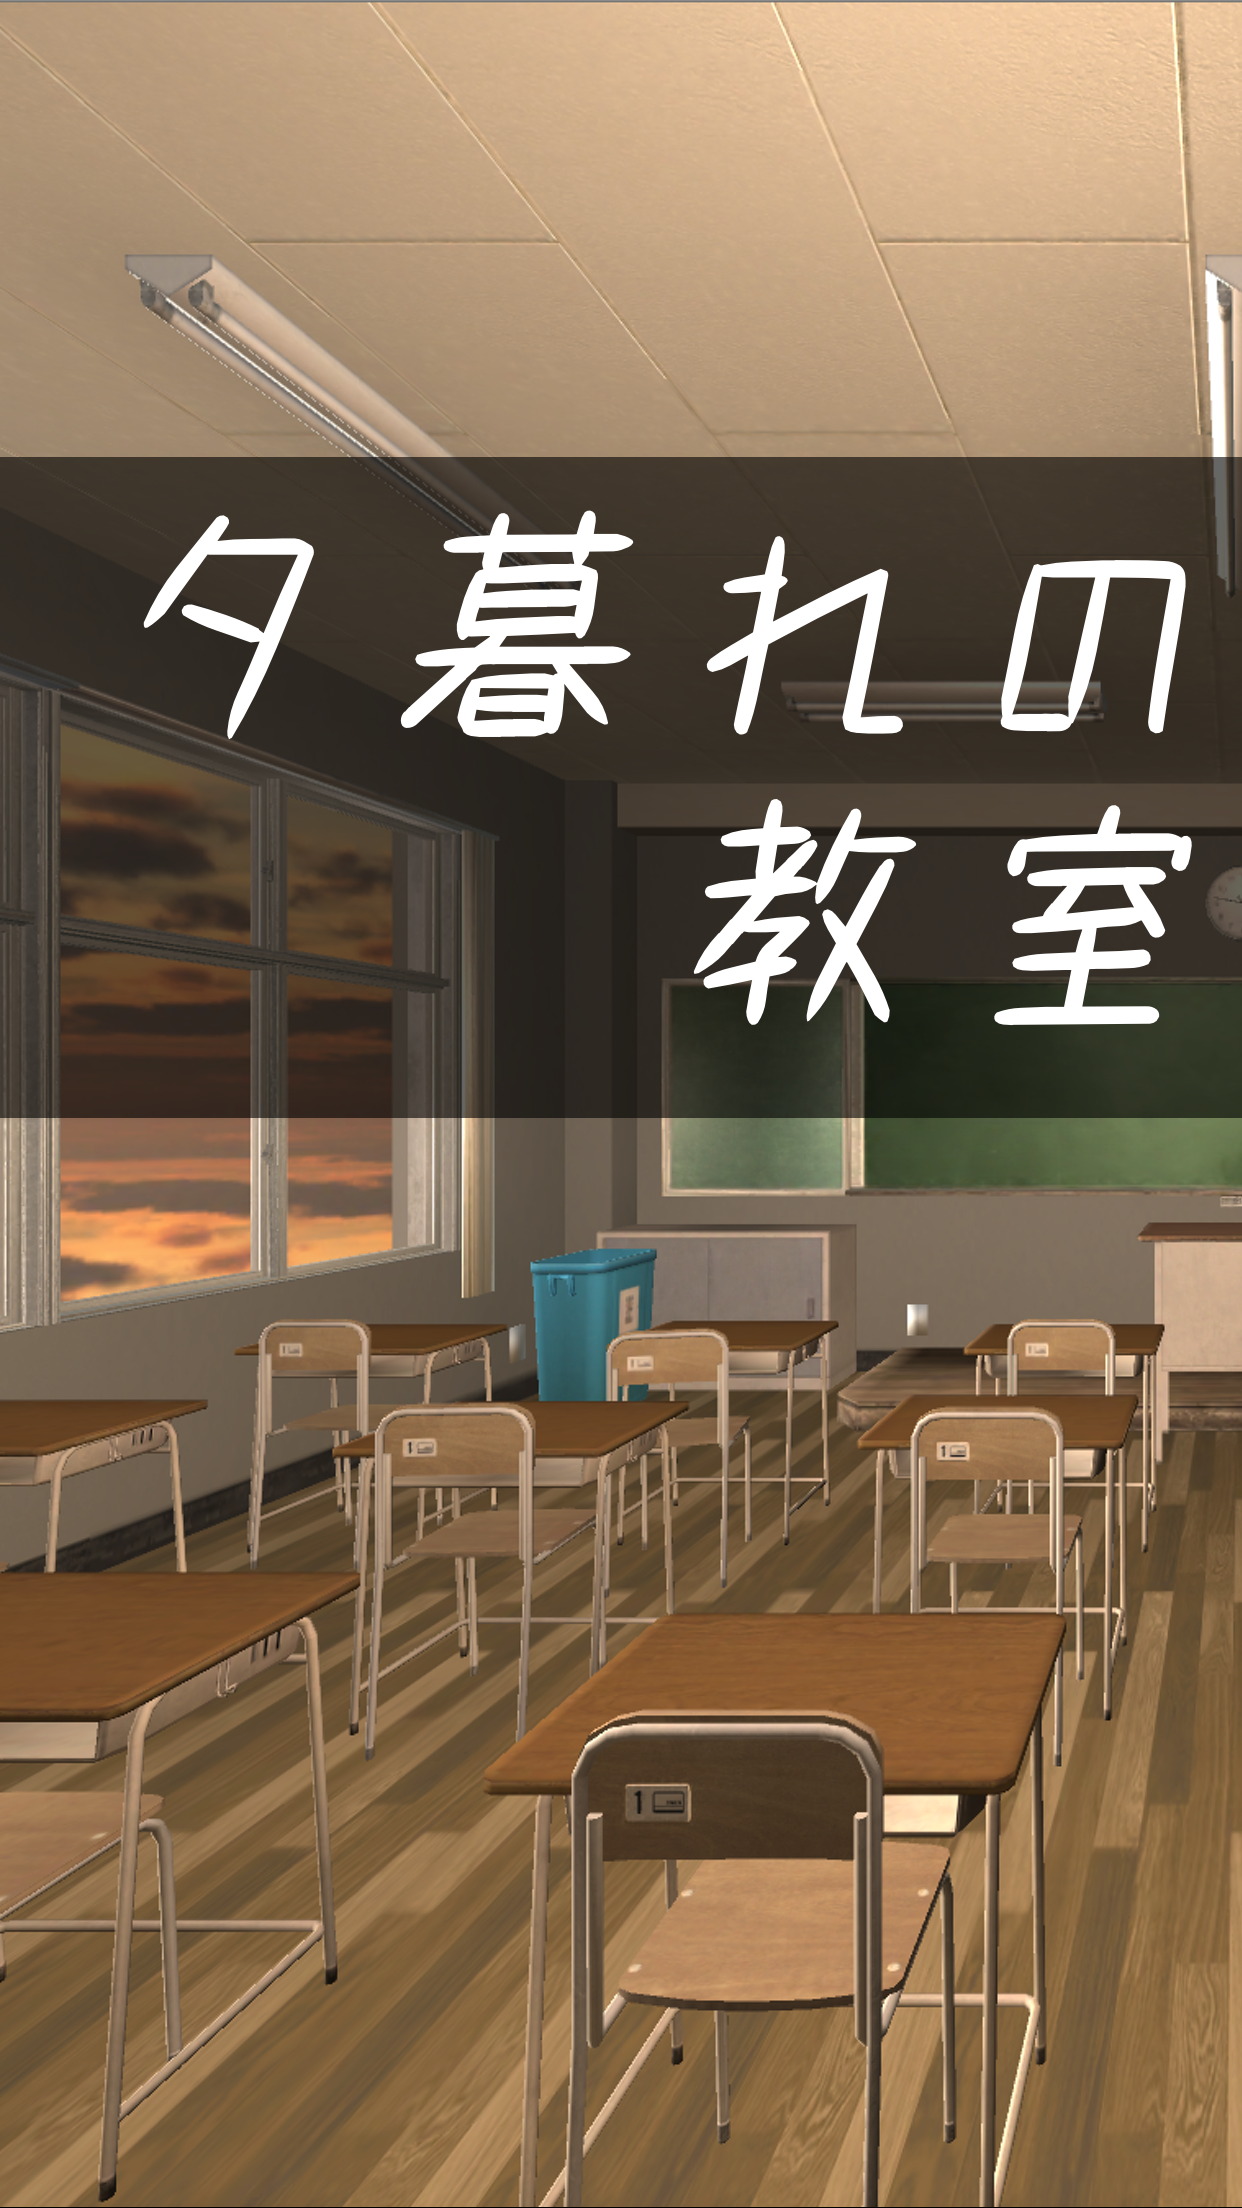 Screenshot 1 of Escape game Escape from the classroom at dusk 1.0.0